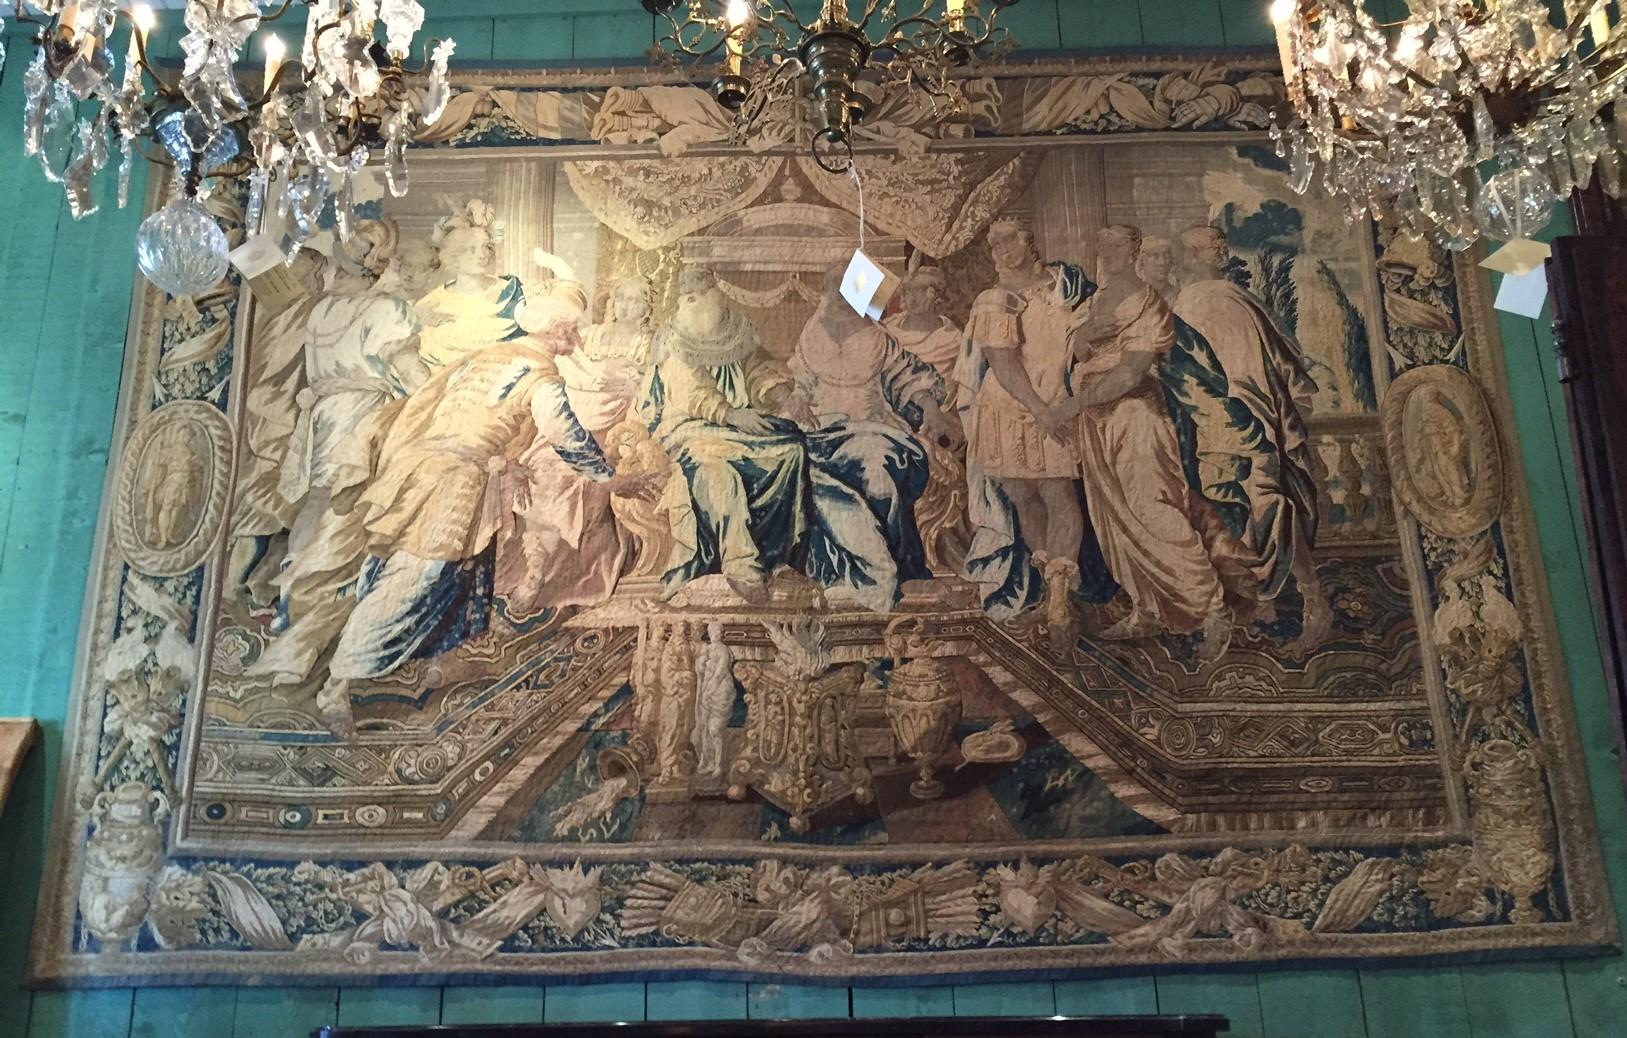 Huge 17th C. Regal Flemish baroque Historical tapestry Royal court Antique LA CA . The period followed Renaissance and preceded Rococo and Neoclassical styles. The movement exuberant detail deep color grandeur to achieve a sense of awe. Court scene